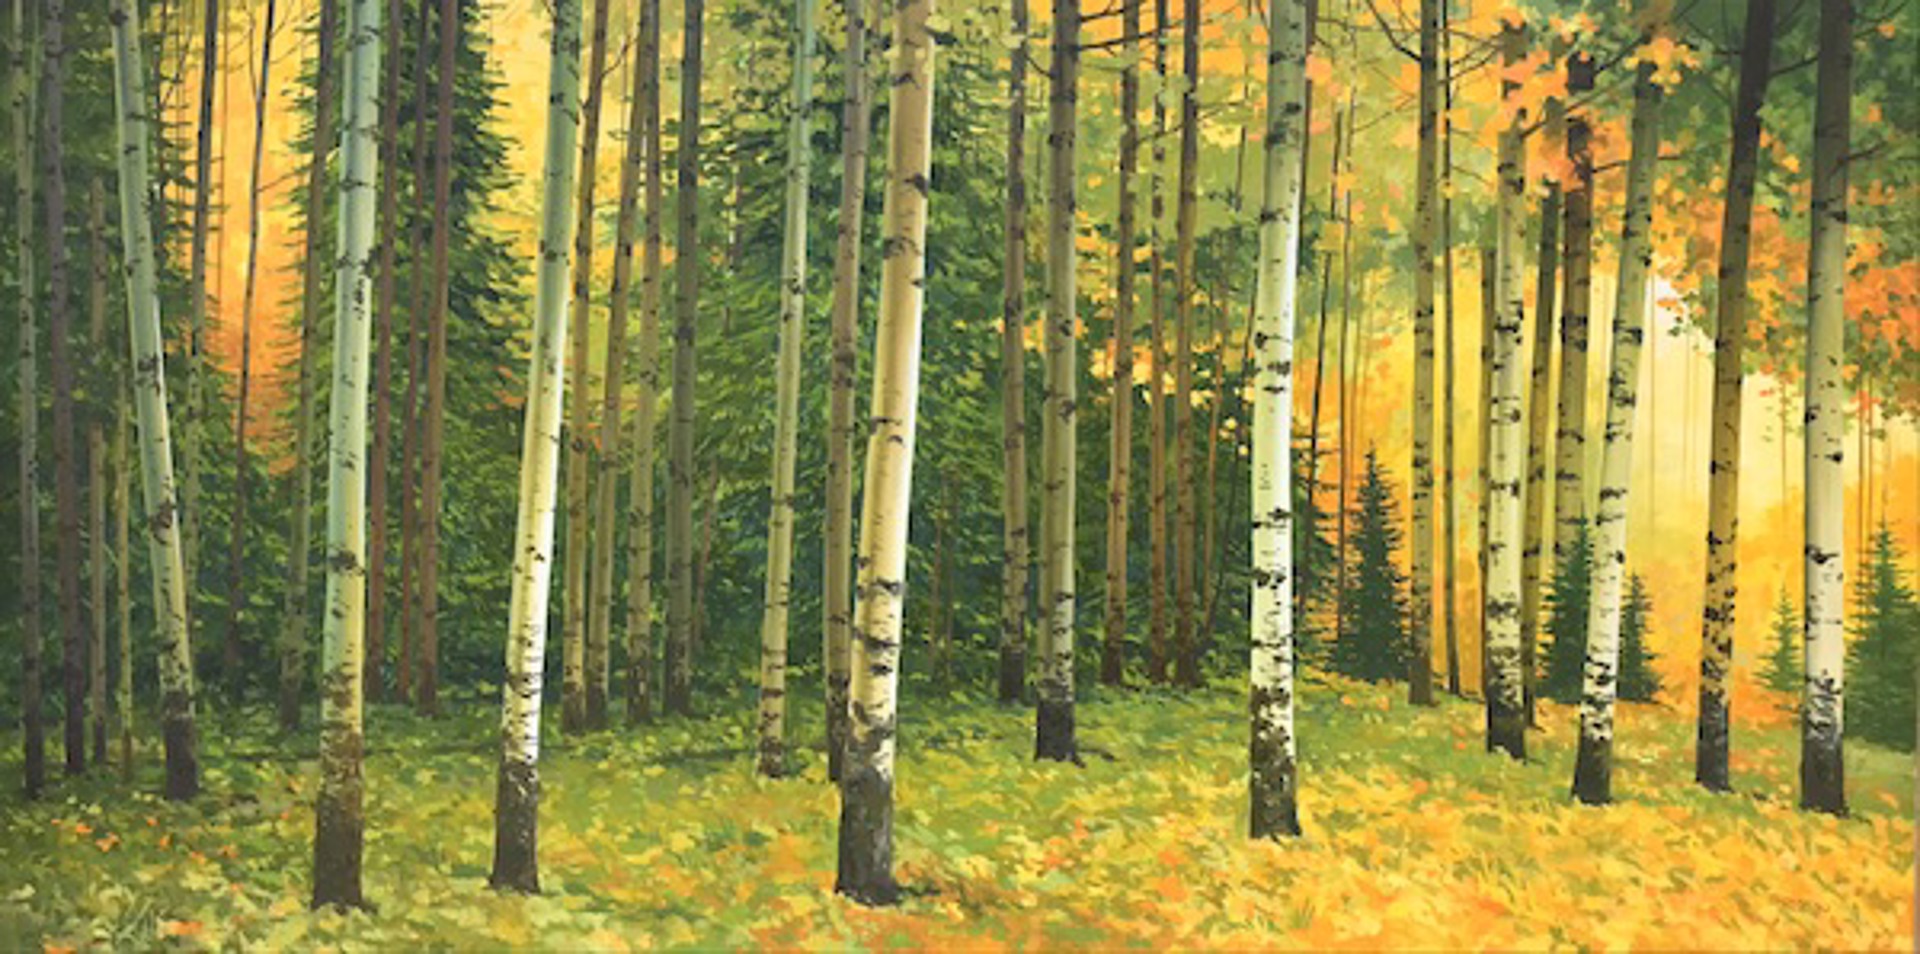 Golden Glade by Keith Thomson